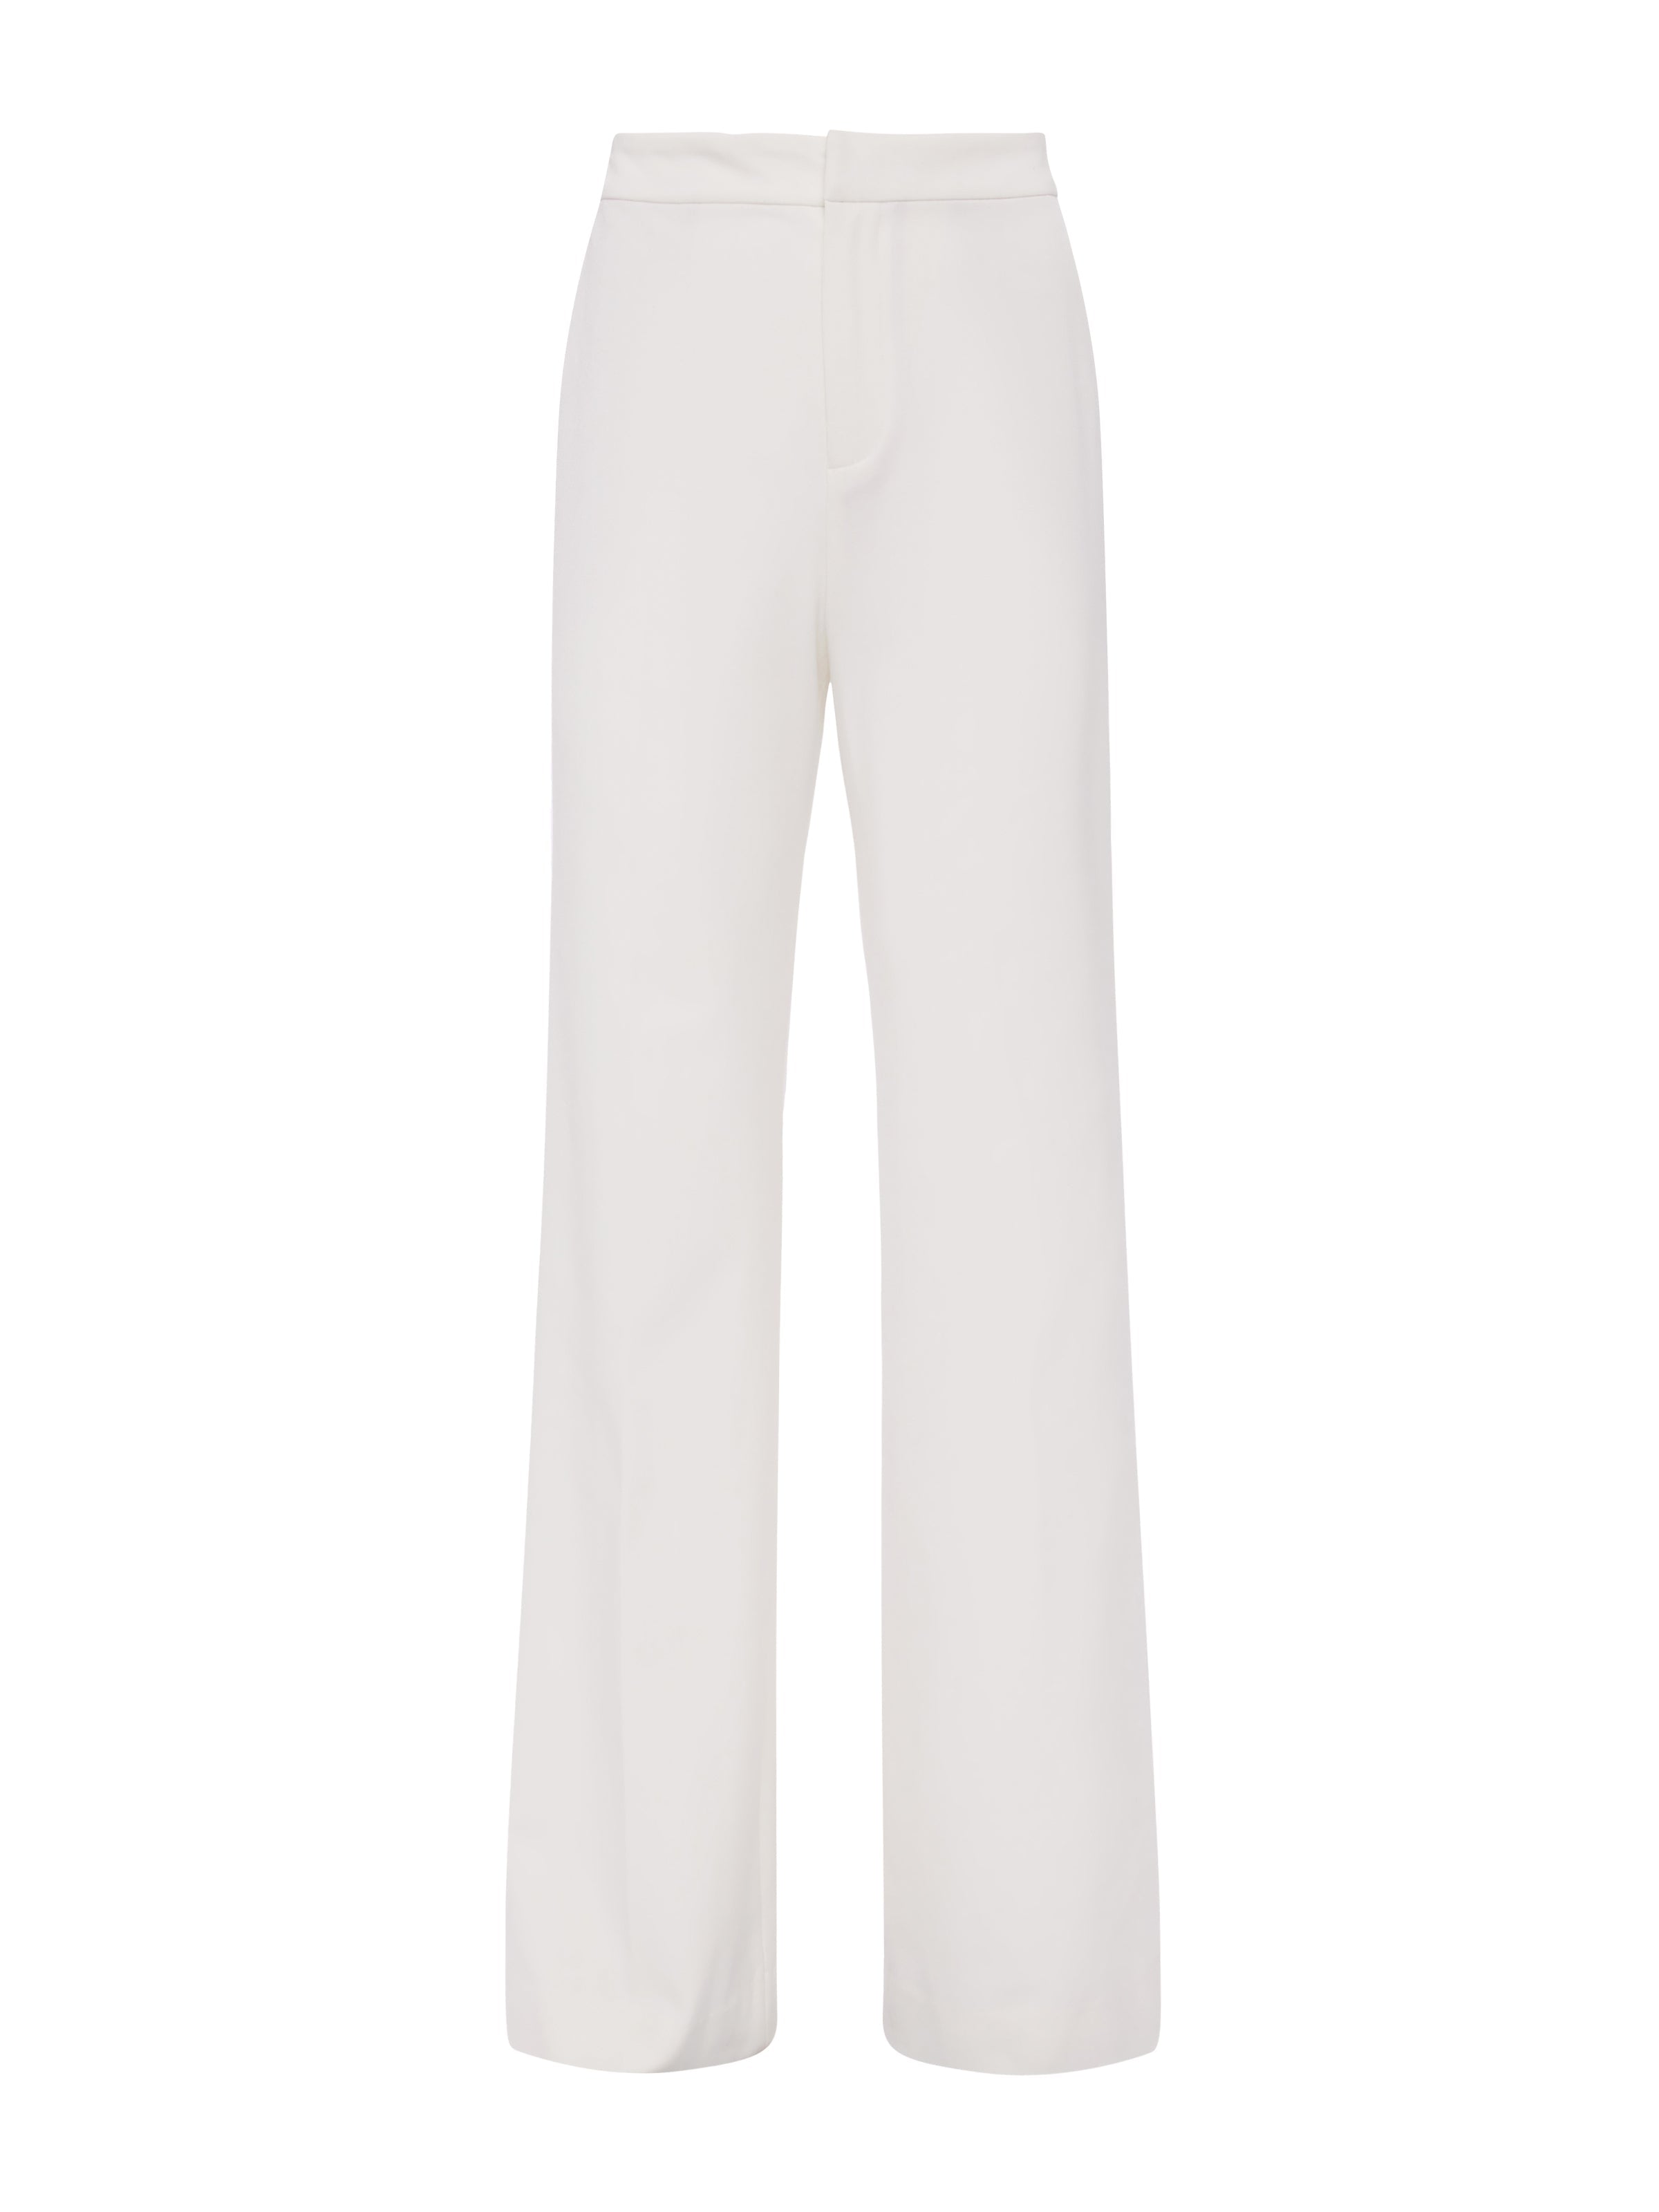 Livvy Straight Leg Trouse in White